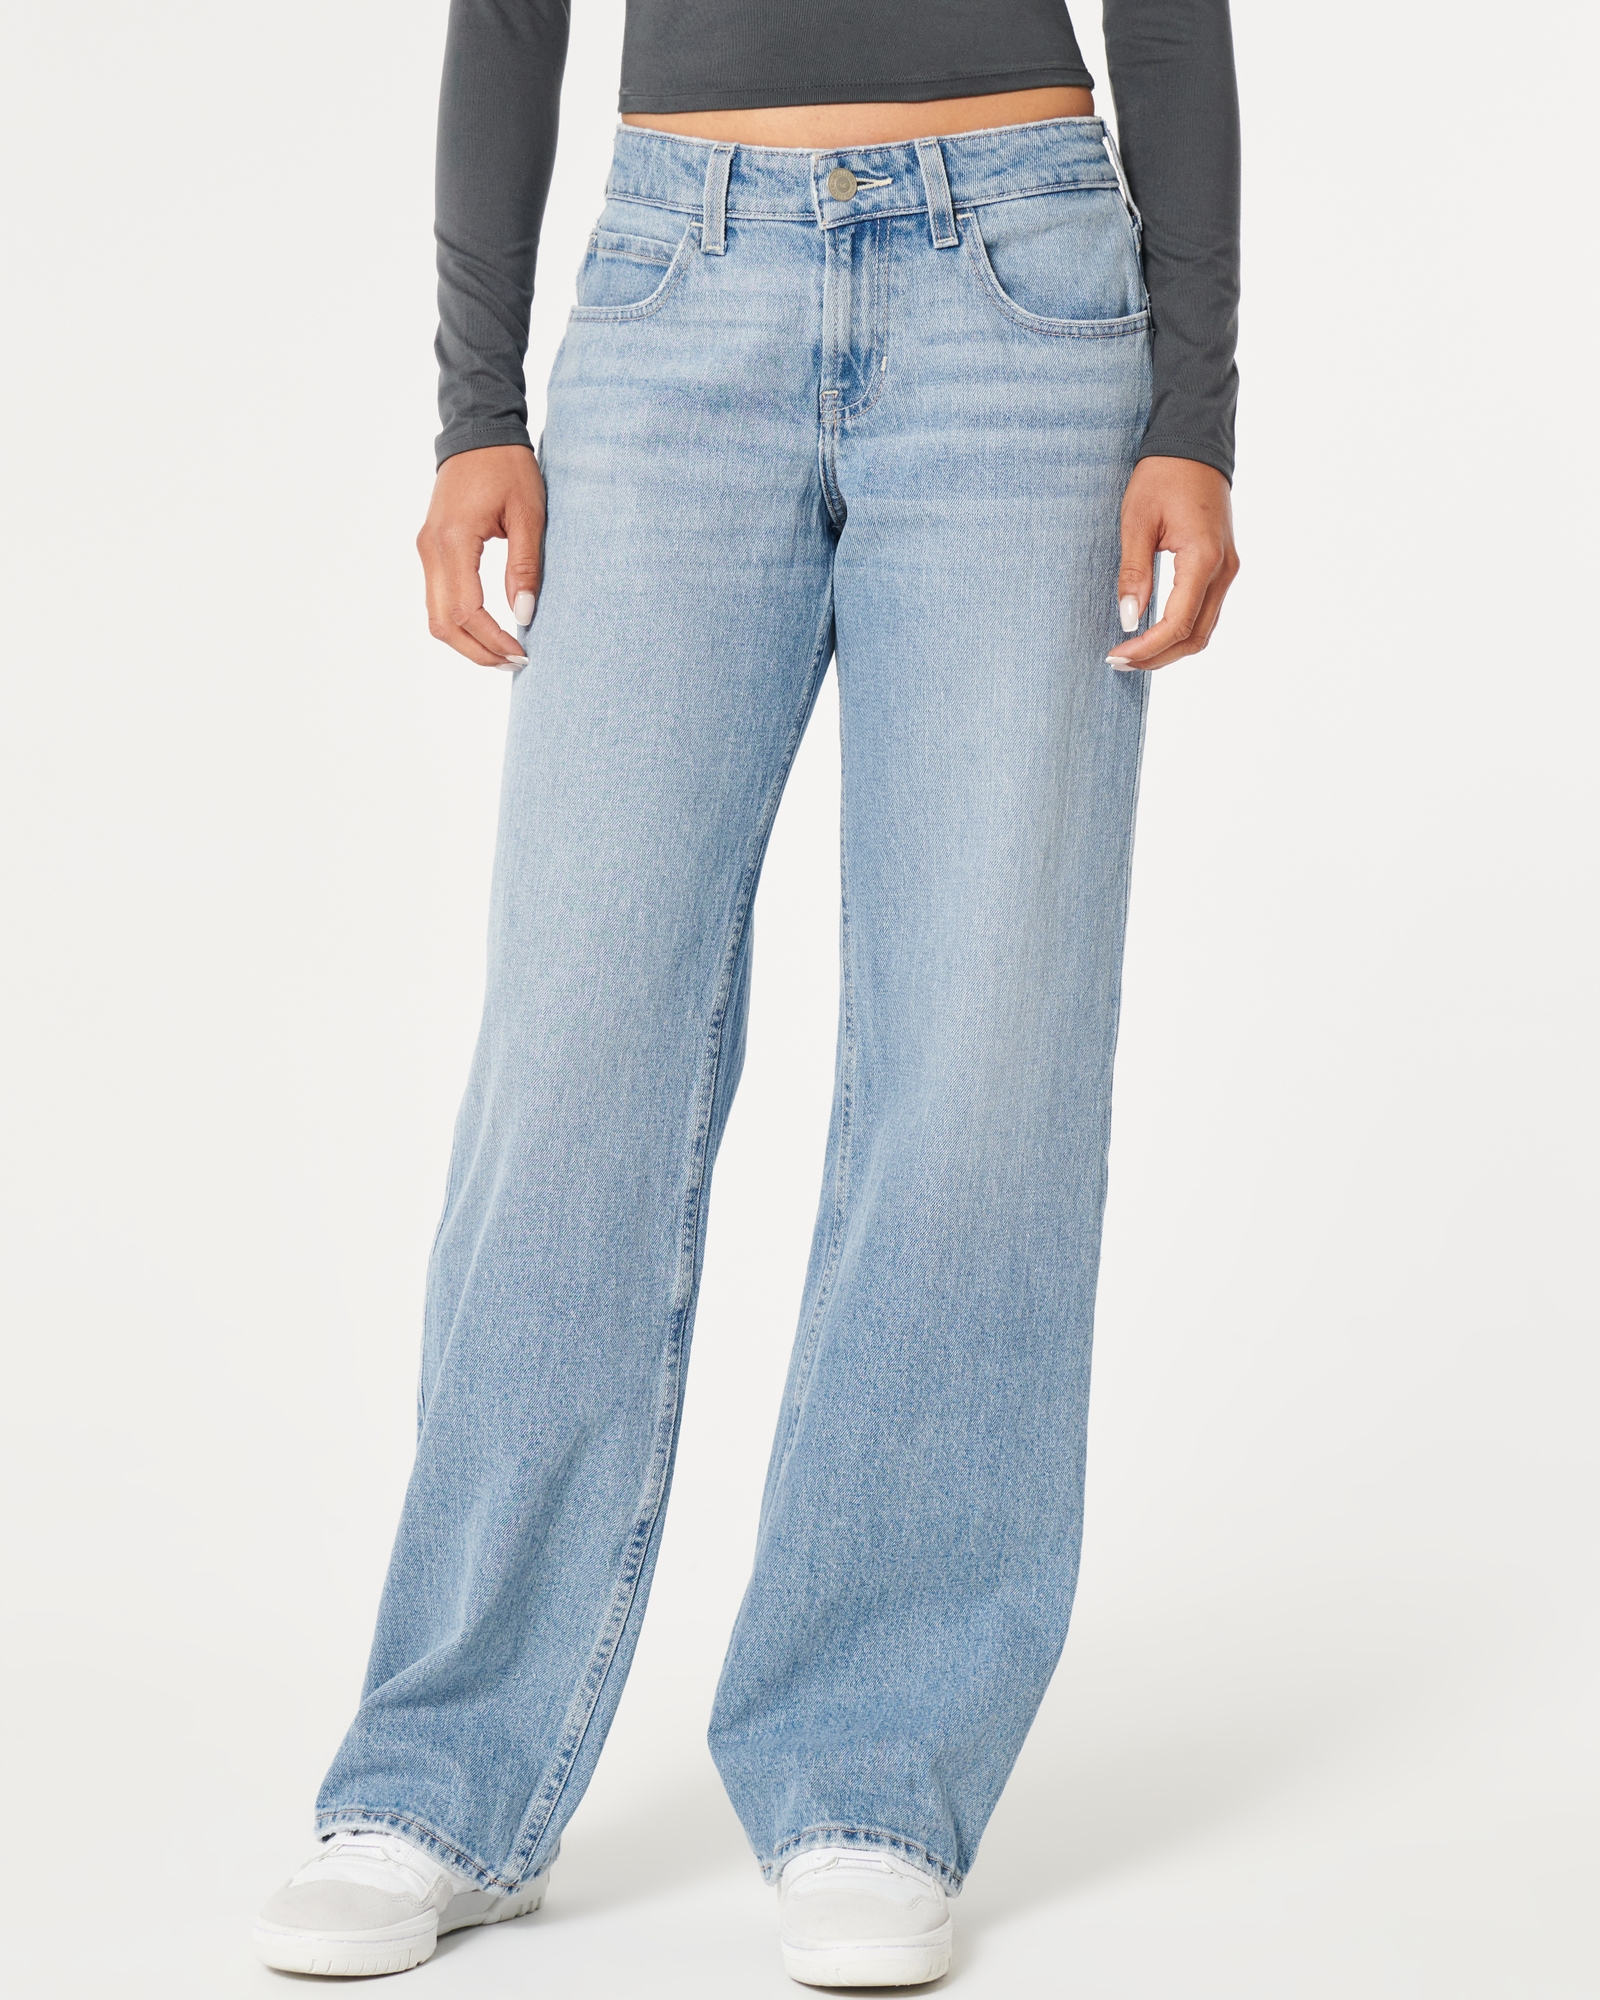 https://img.hollisterco.com/is/image/anf/KIC_355-3427-0067-280_model2.jpg?policy=product-extra-large